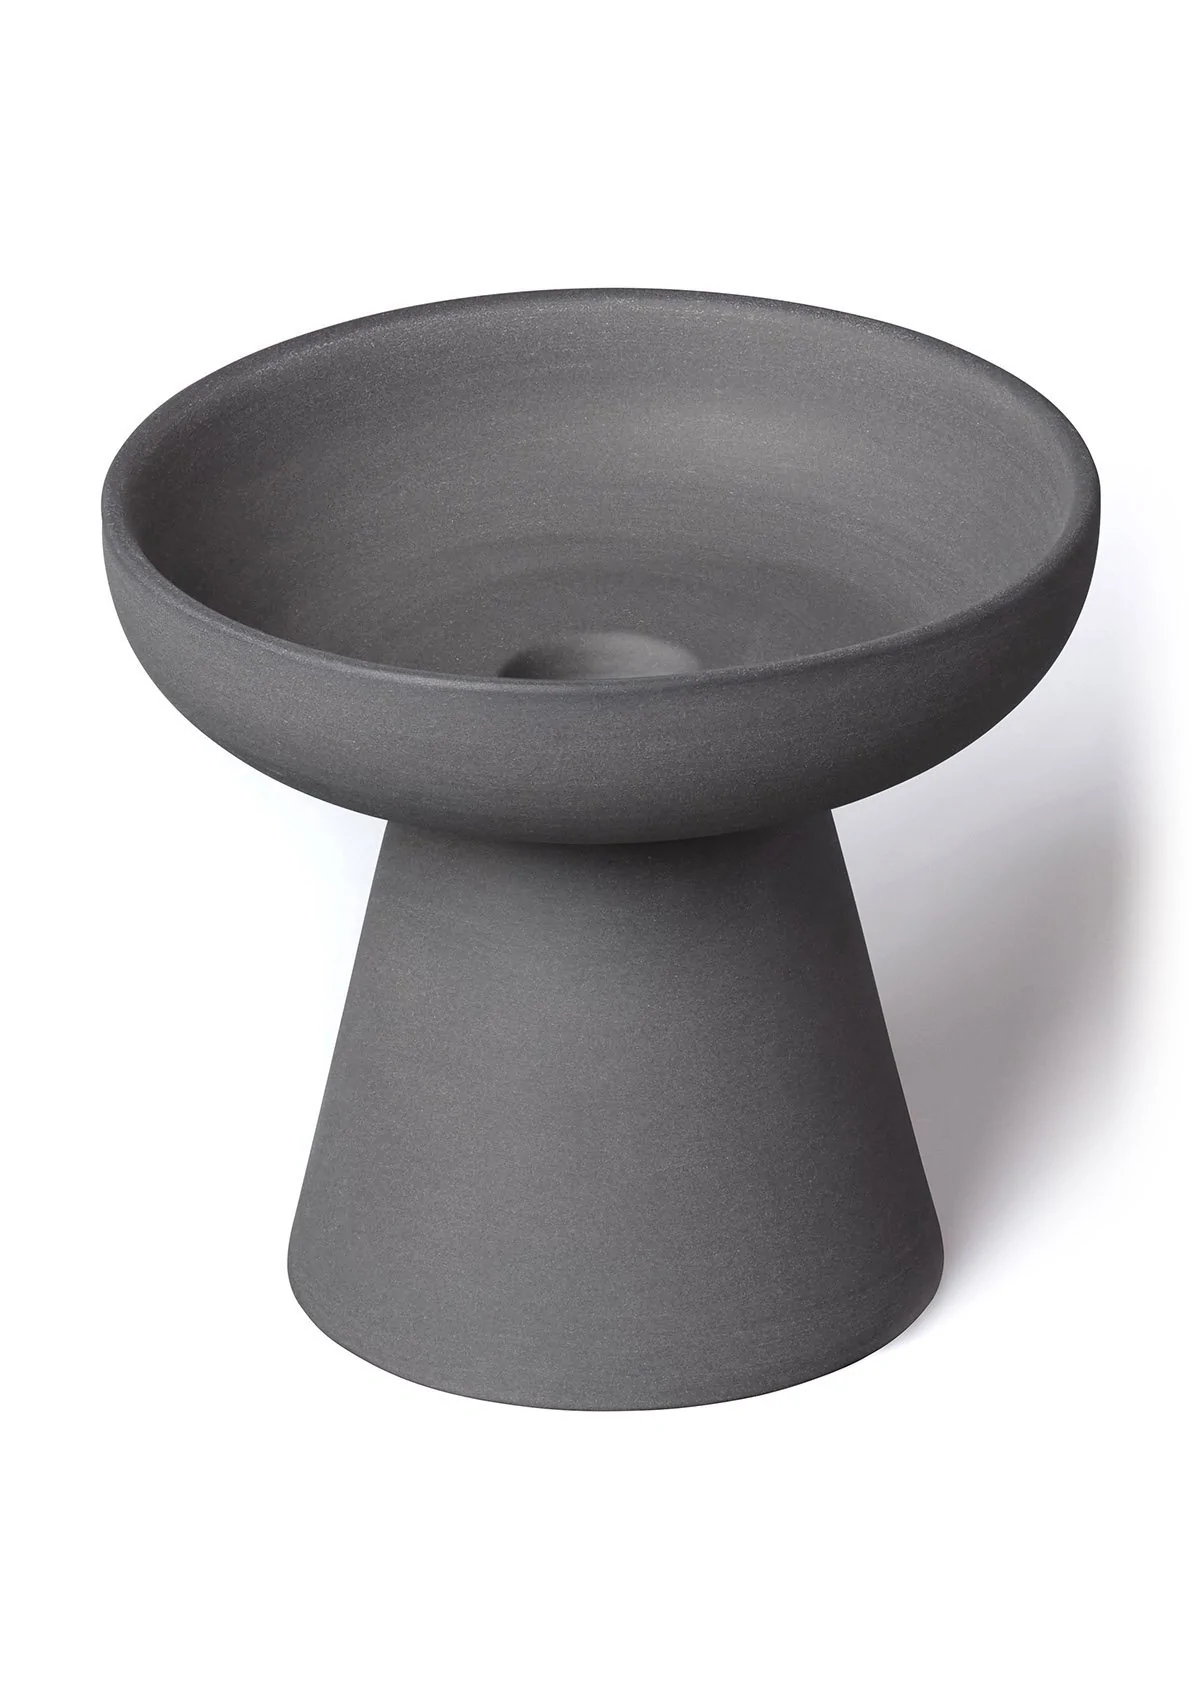 aery-porcini-small-candle-holder-in-charcoal-matt-clay